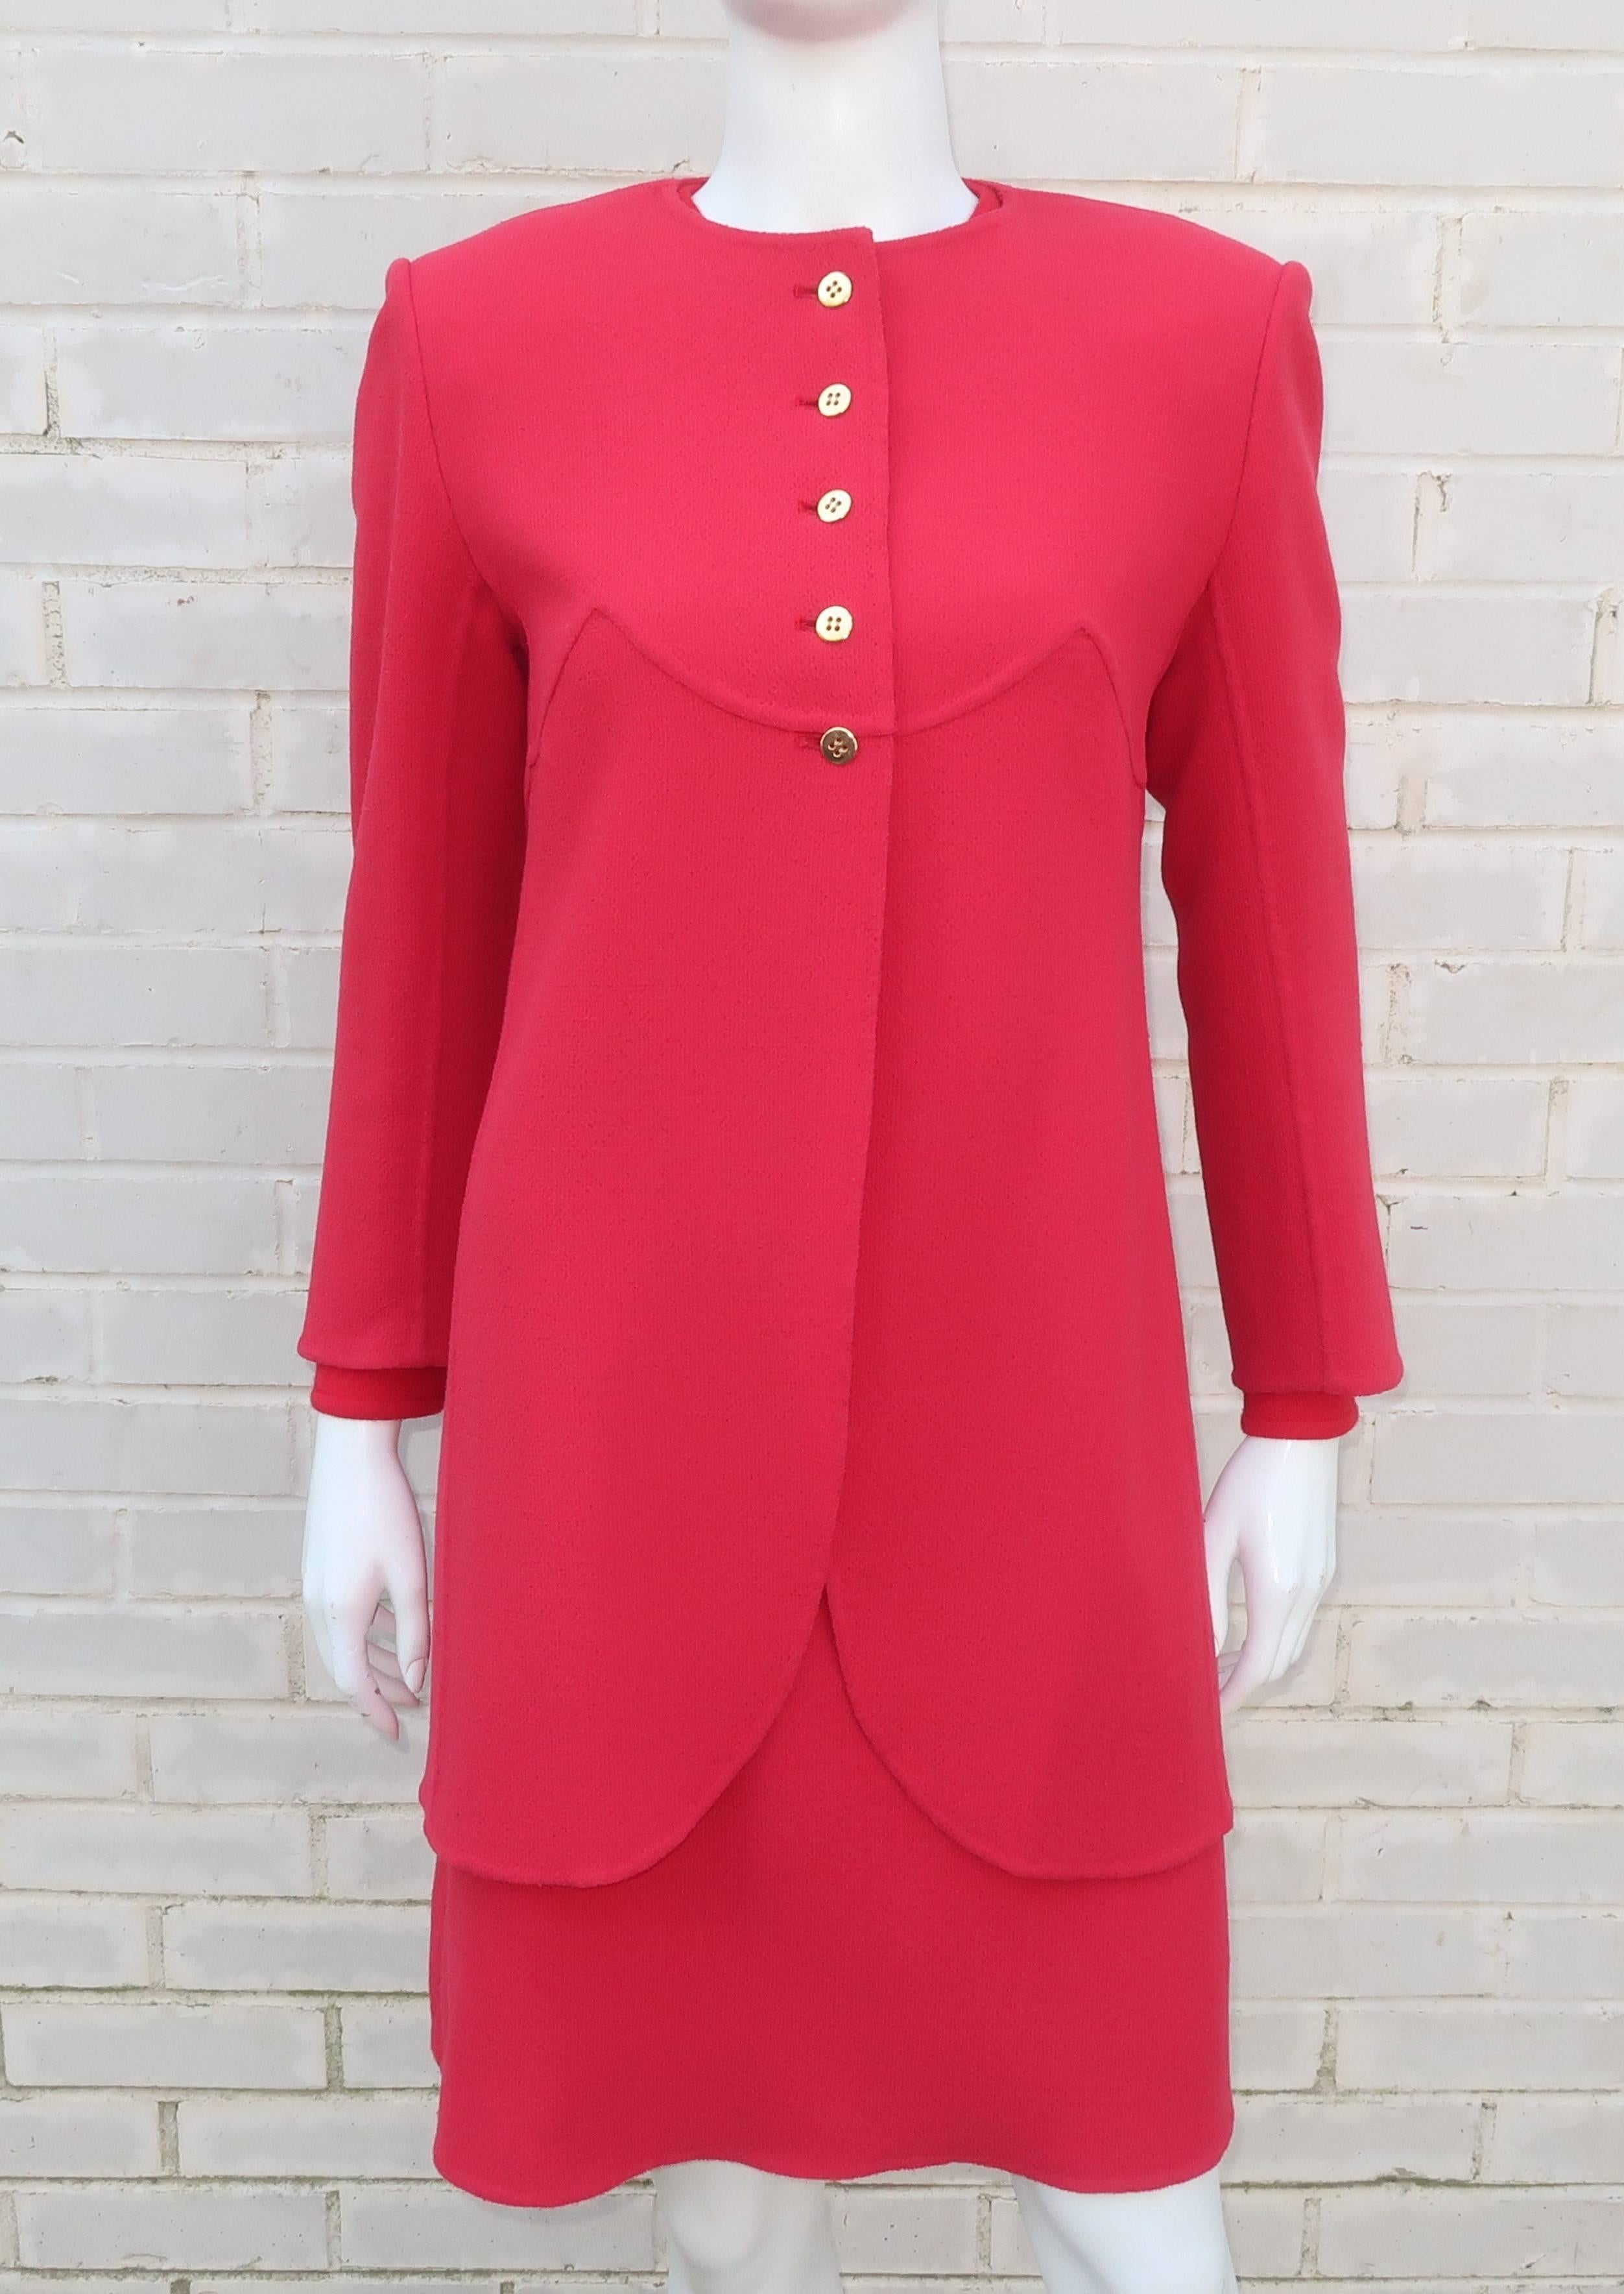 Bill Blass made a name for himself designing clothes for east coast society and this elegant two piece dress ensemble has all the bells and whistles of a ‘ladies who lunch’ look.  The long sleeve lined wool knit dress zips and hooks at the back with